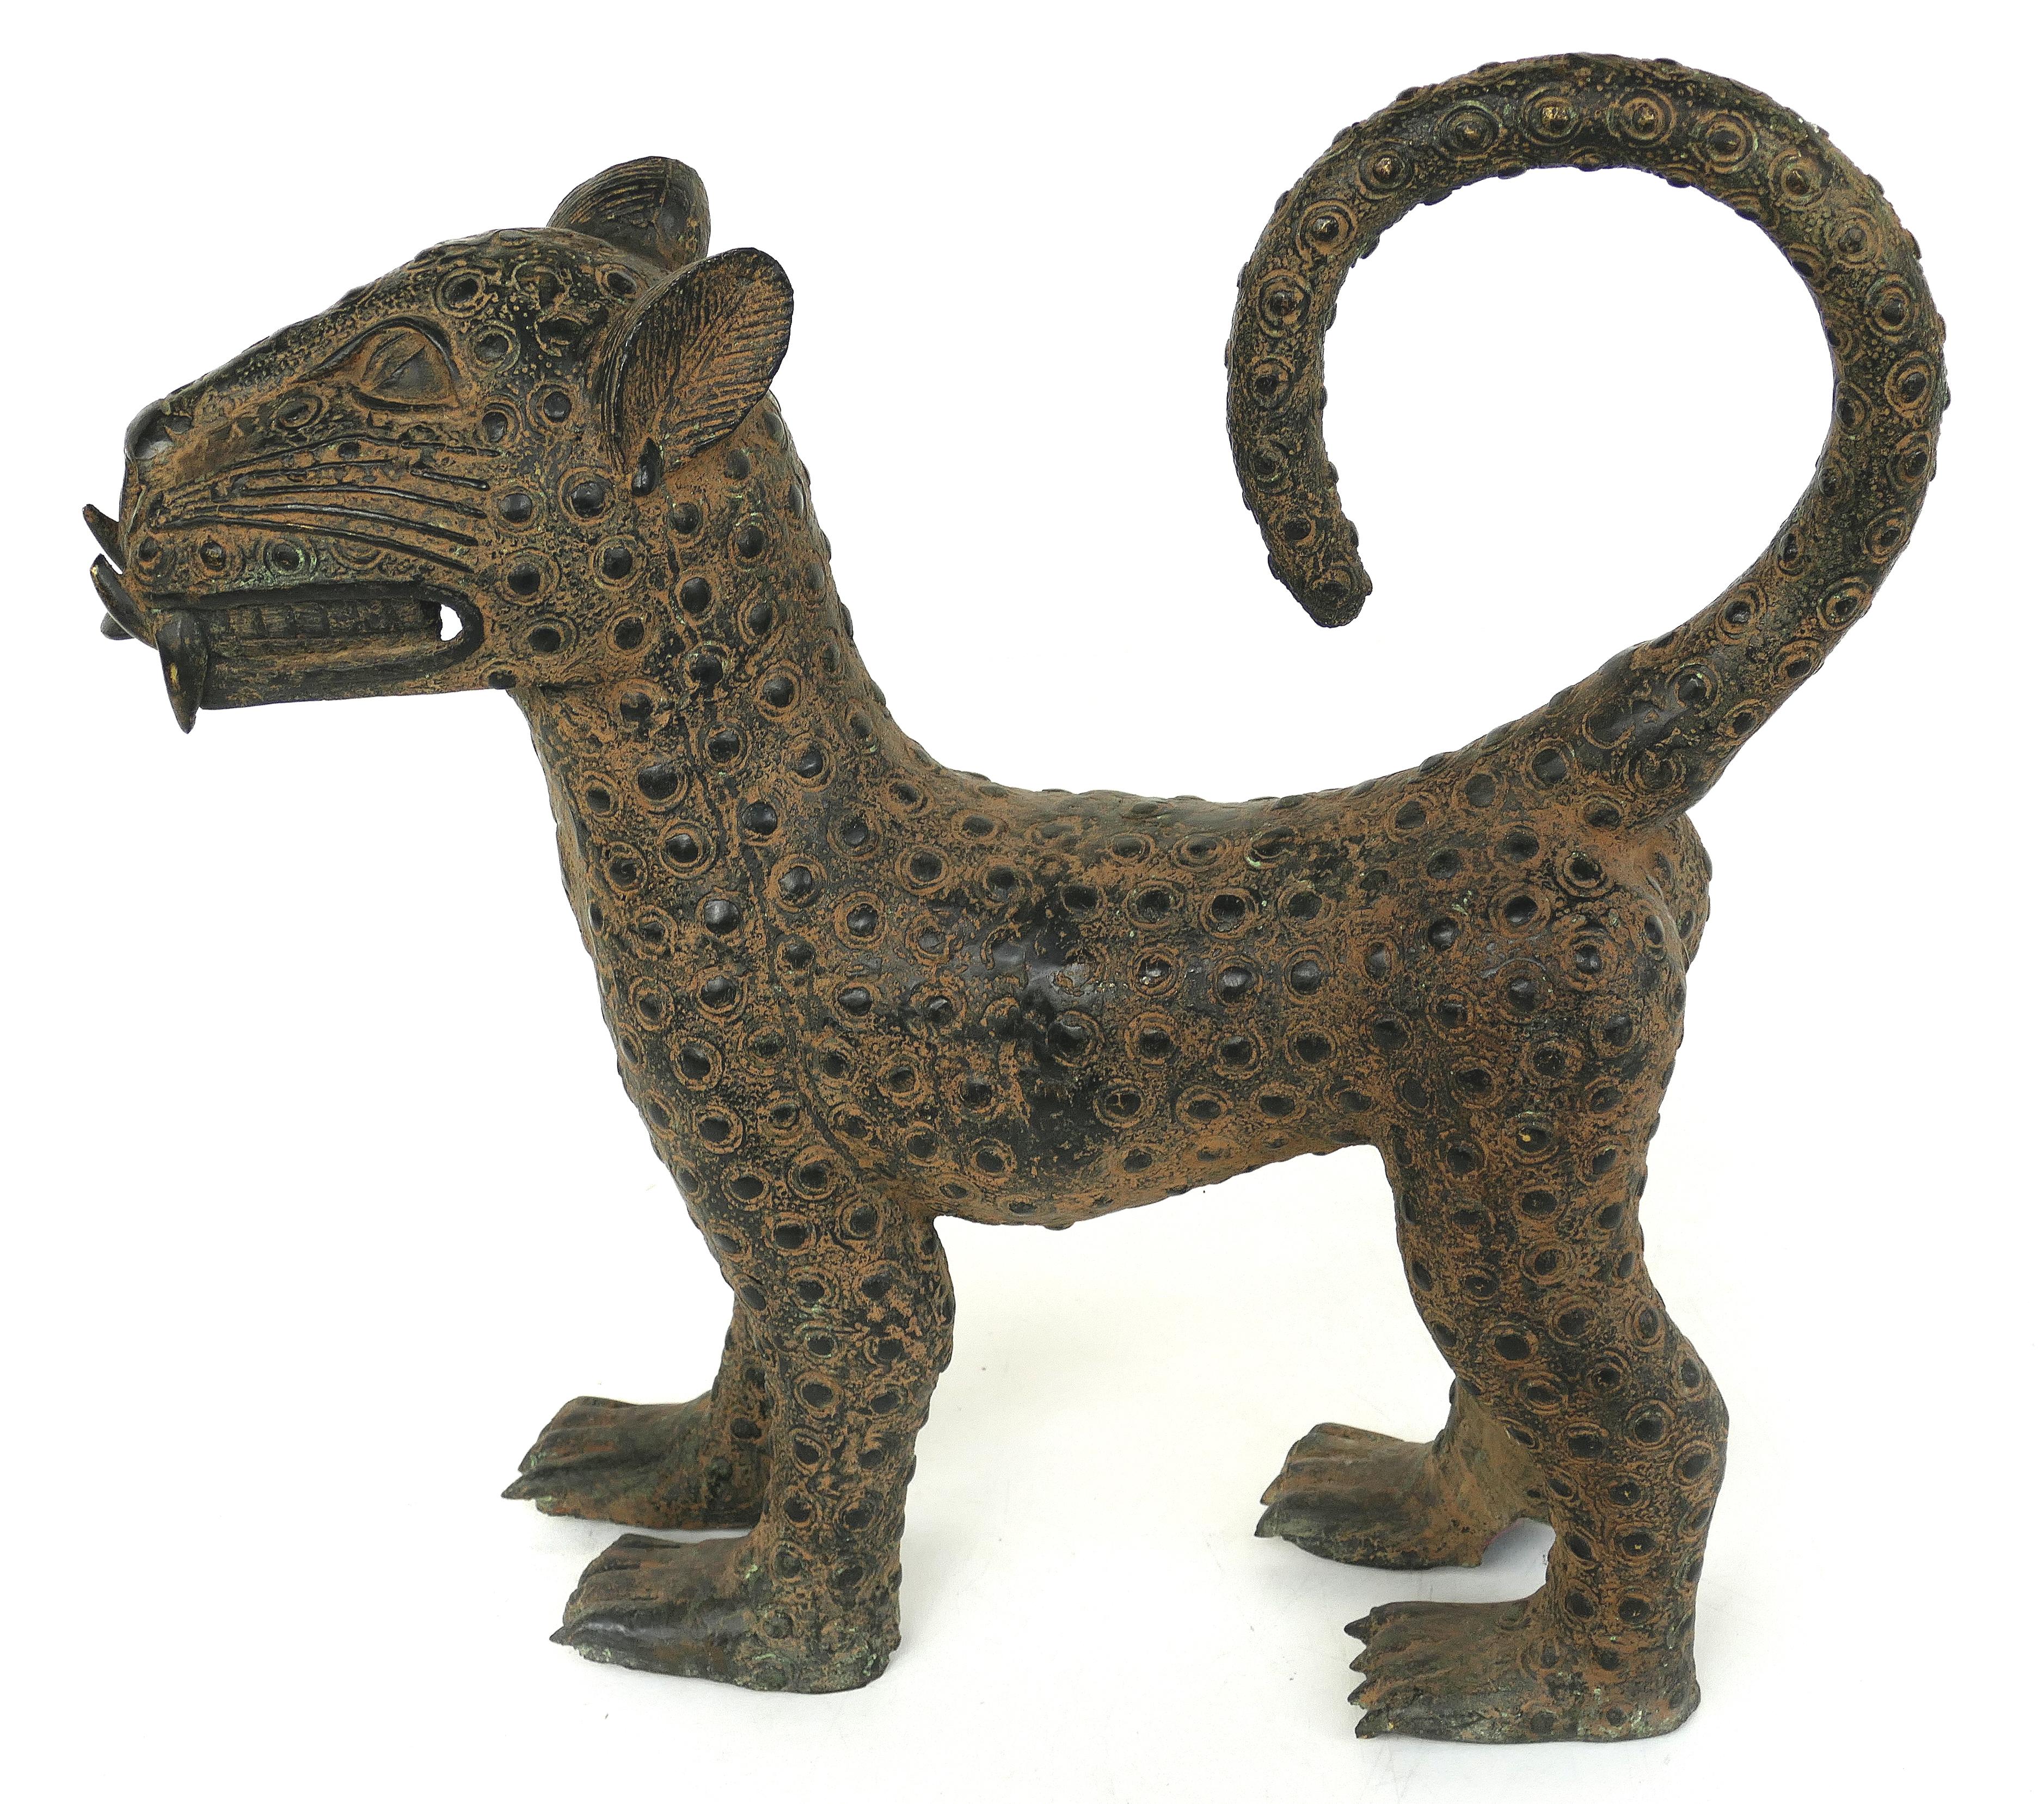 Smaller Benin 'Nigeria' bronze sculptures of Leopards, Modern Replicas

Offered for sale is a pair of modern 20th century copies of Benin (modern-day Nigeria) bronze figural sculptures of young leopards. This impressive pair of leopards make a